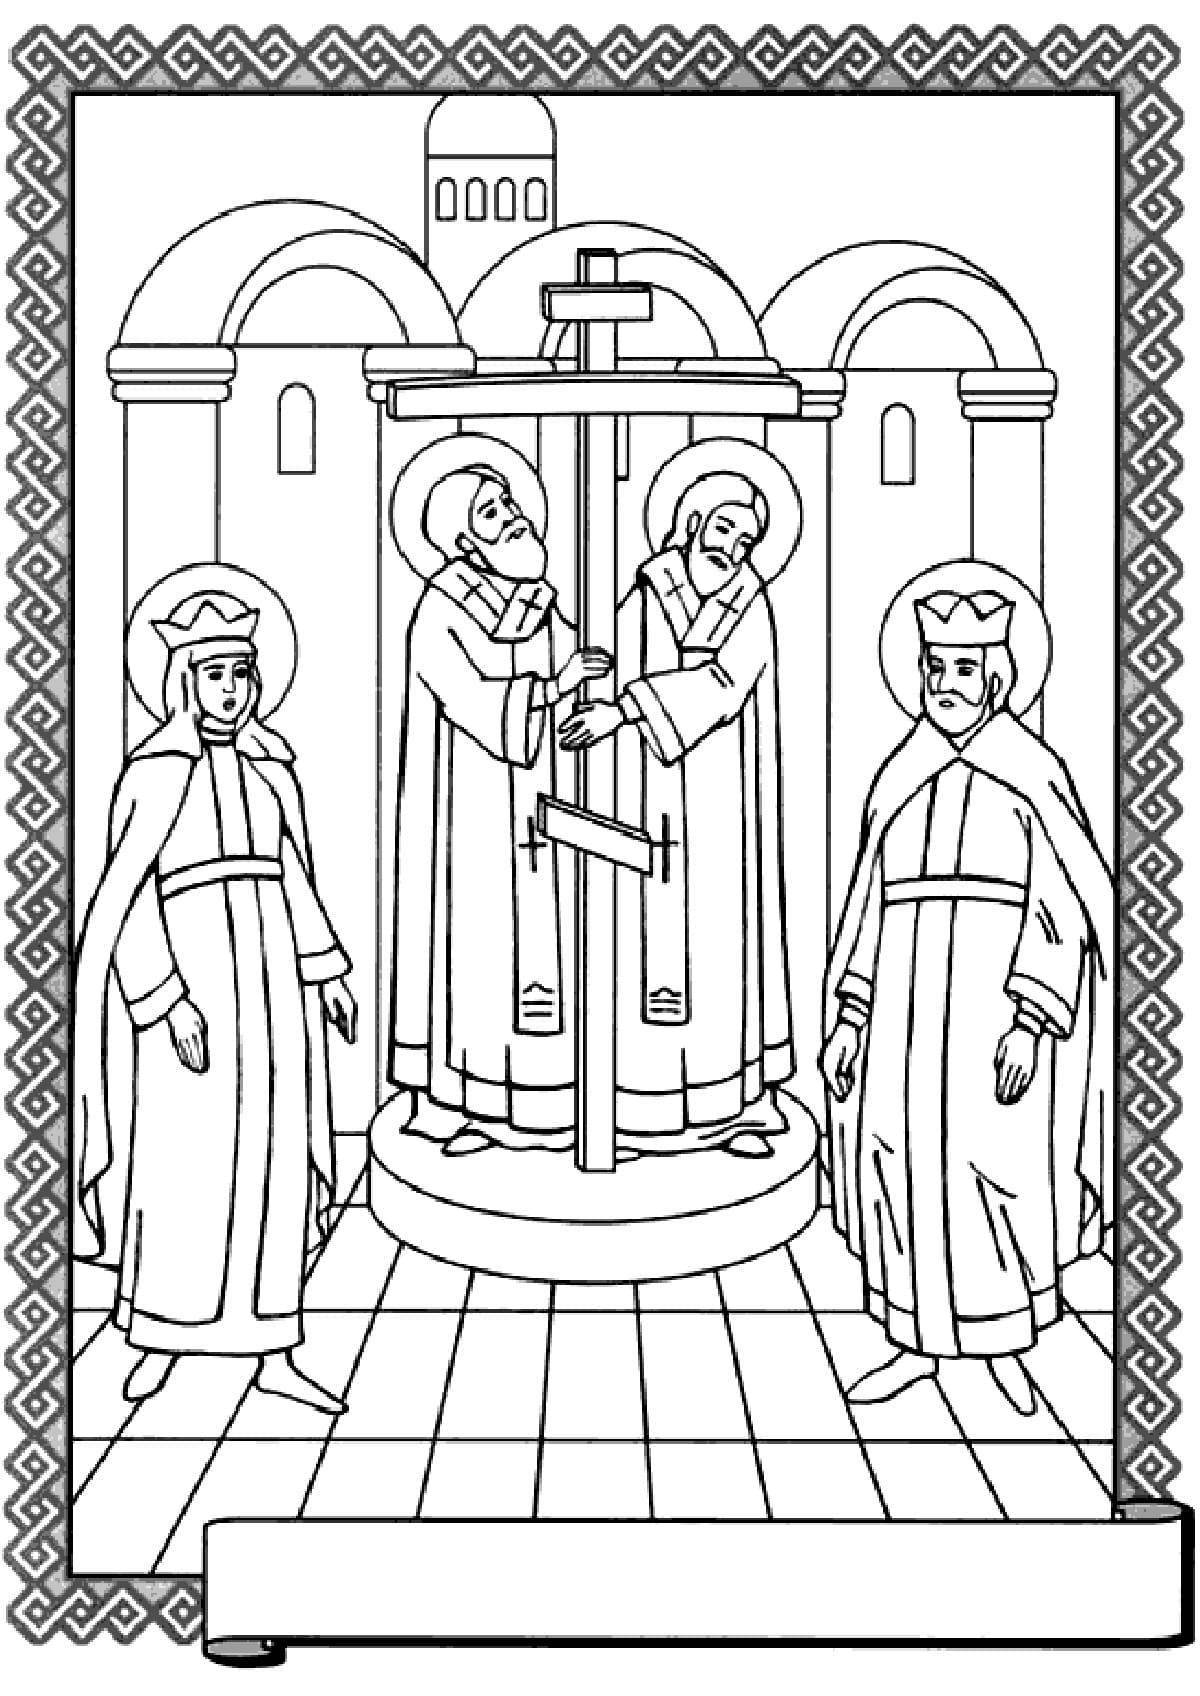 Animated Orthodox coloring book